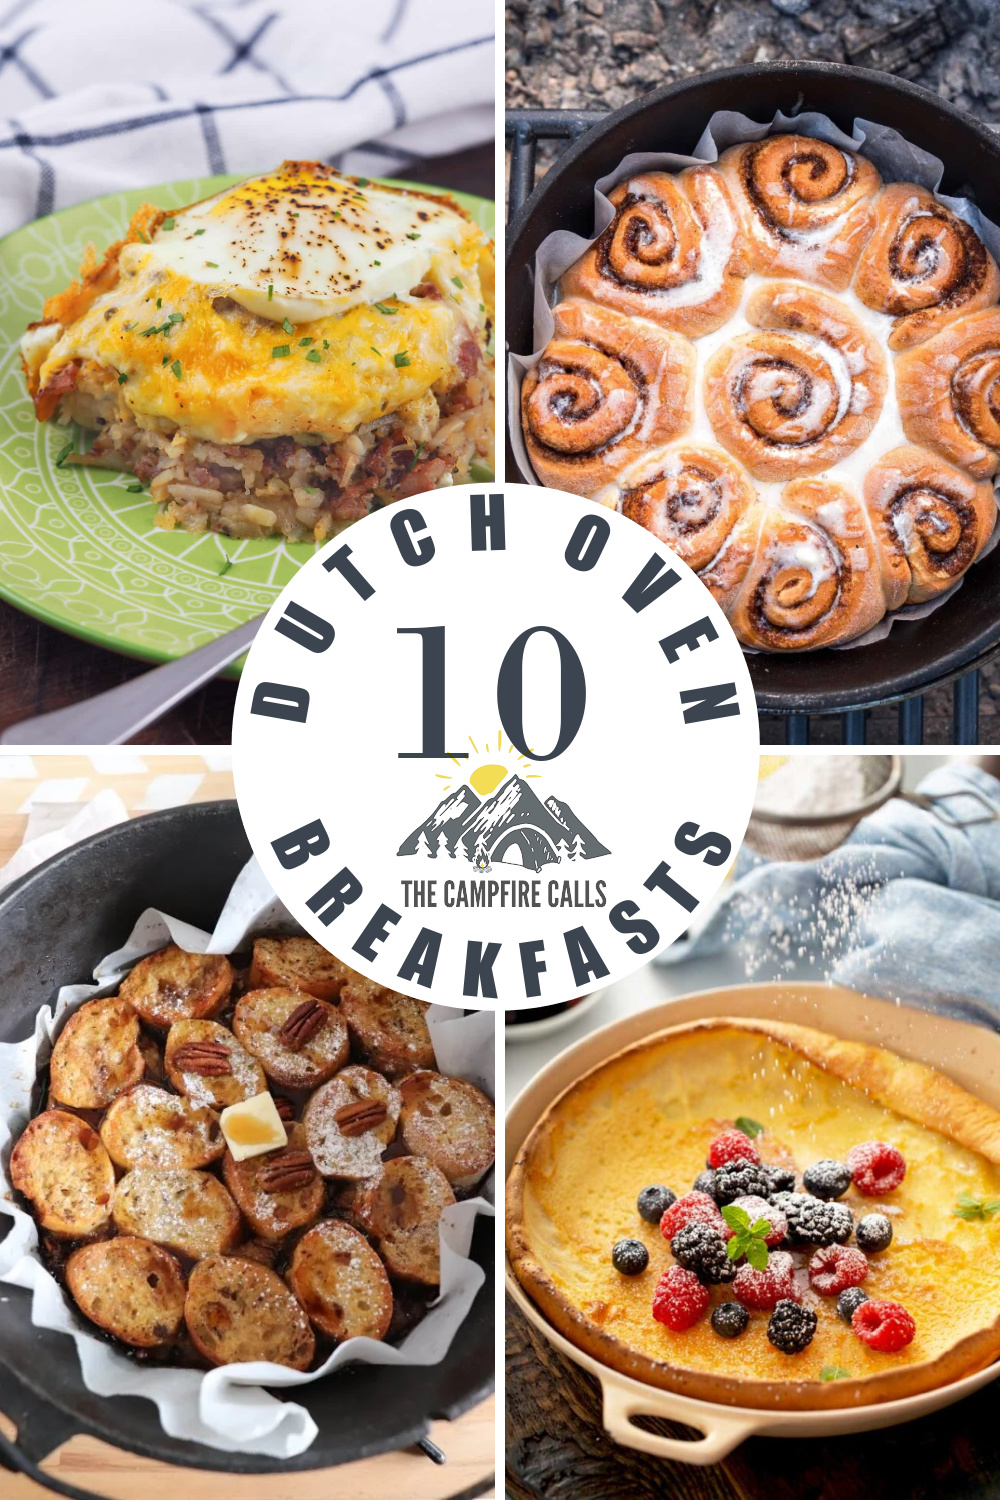 We've collected our top 10 favorite dutch oven camping breakfast recipes, just in time for you to start planning your next outdoor adventure!